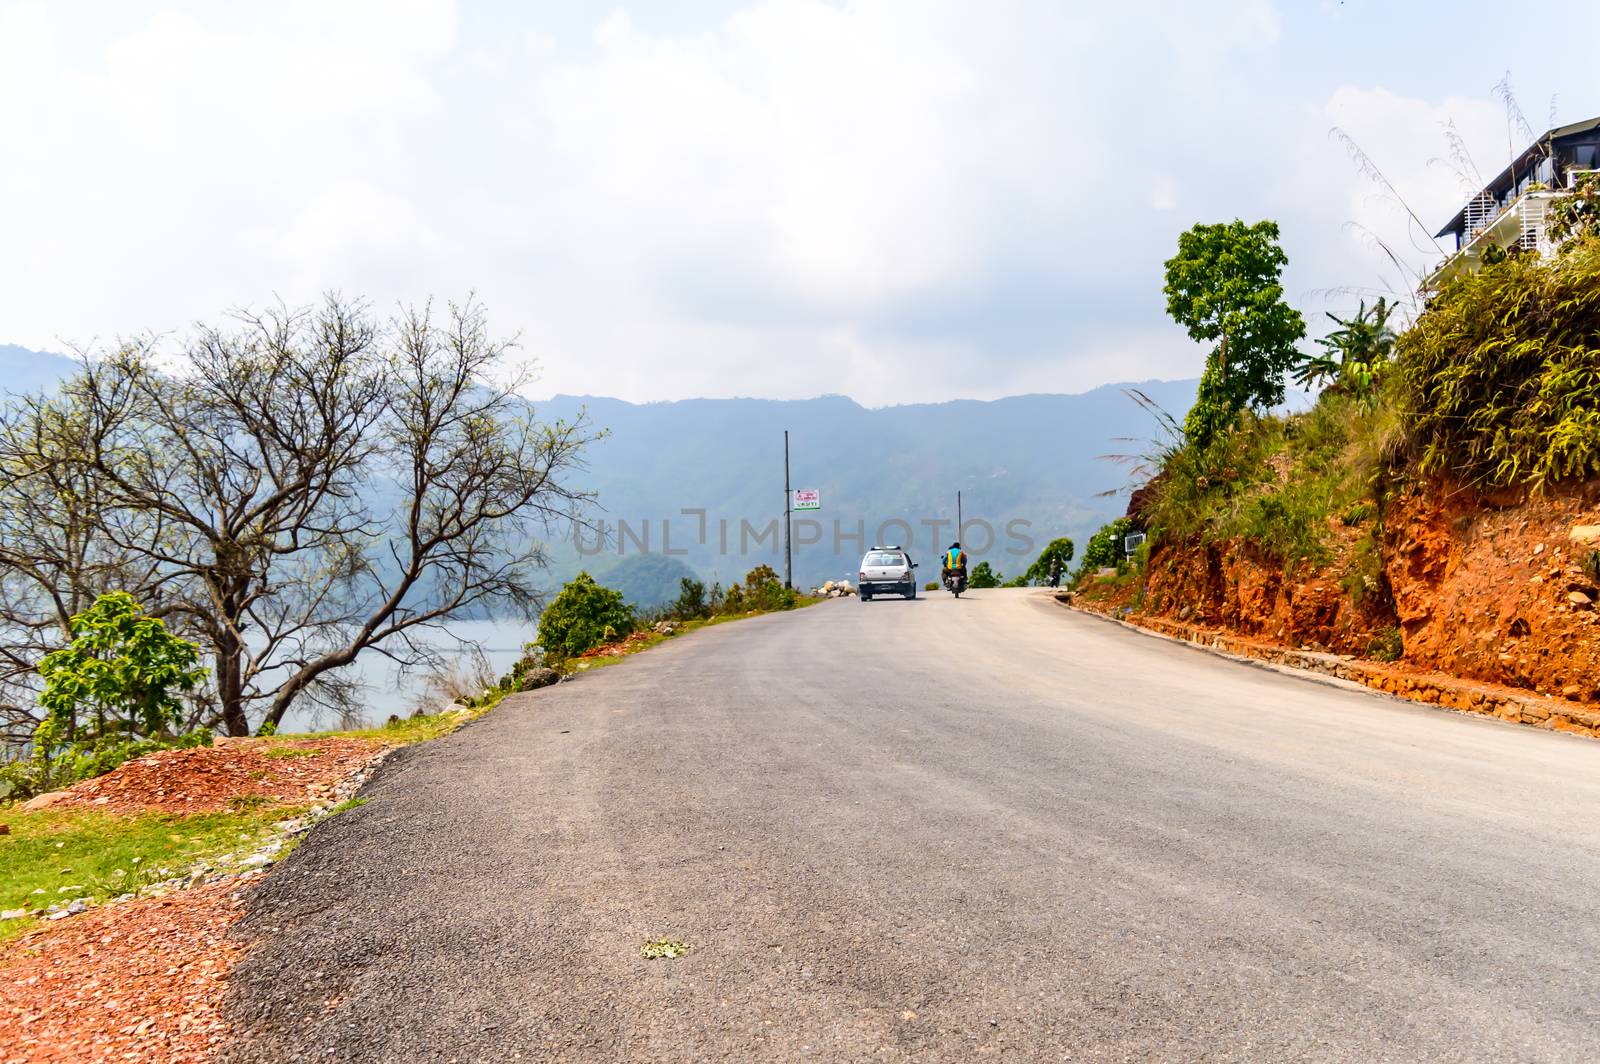 Photograph of empty road with hill in surrounding near Pokhara Lake at Kathmandu Nepal. Snap in portrait, landscape, wide screen style. Vintage film look. Vacation Freedom, Simplicity Concept.